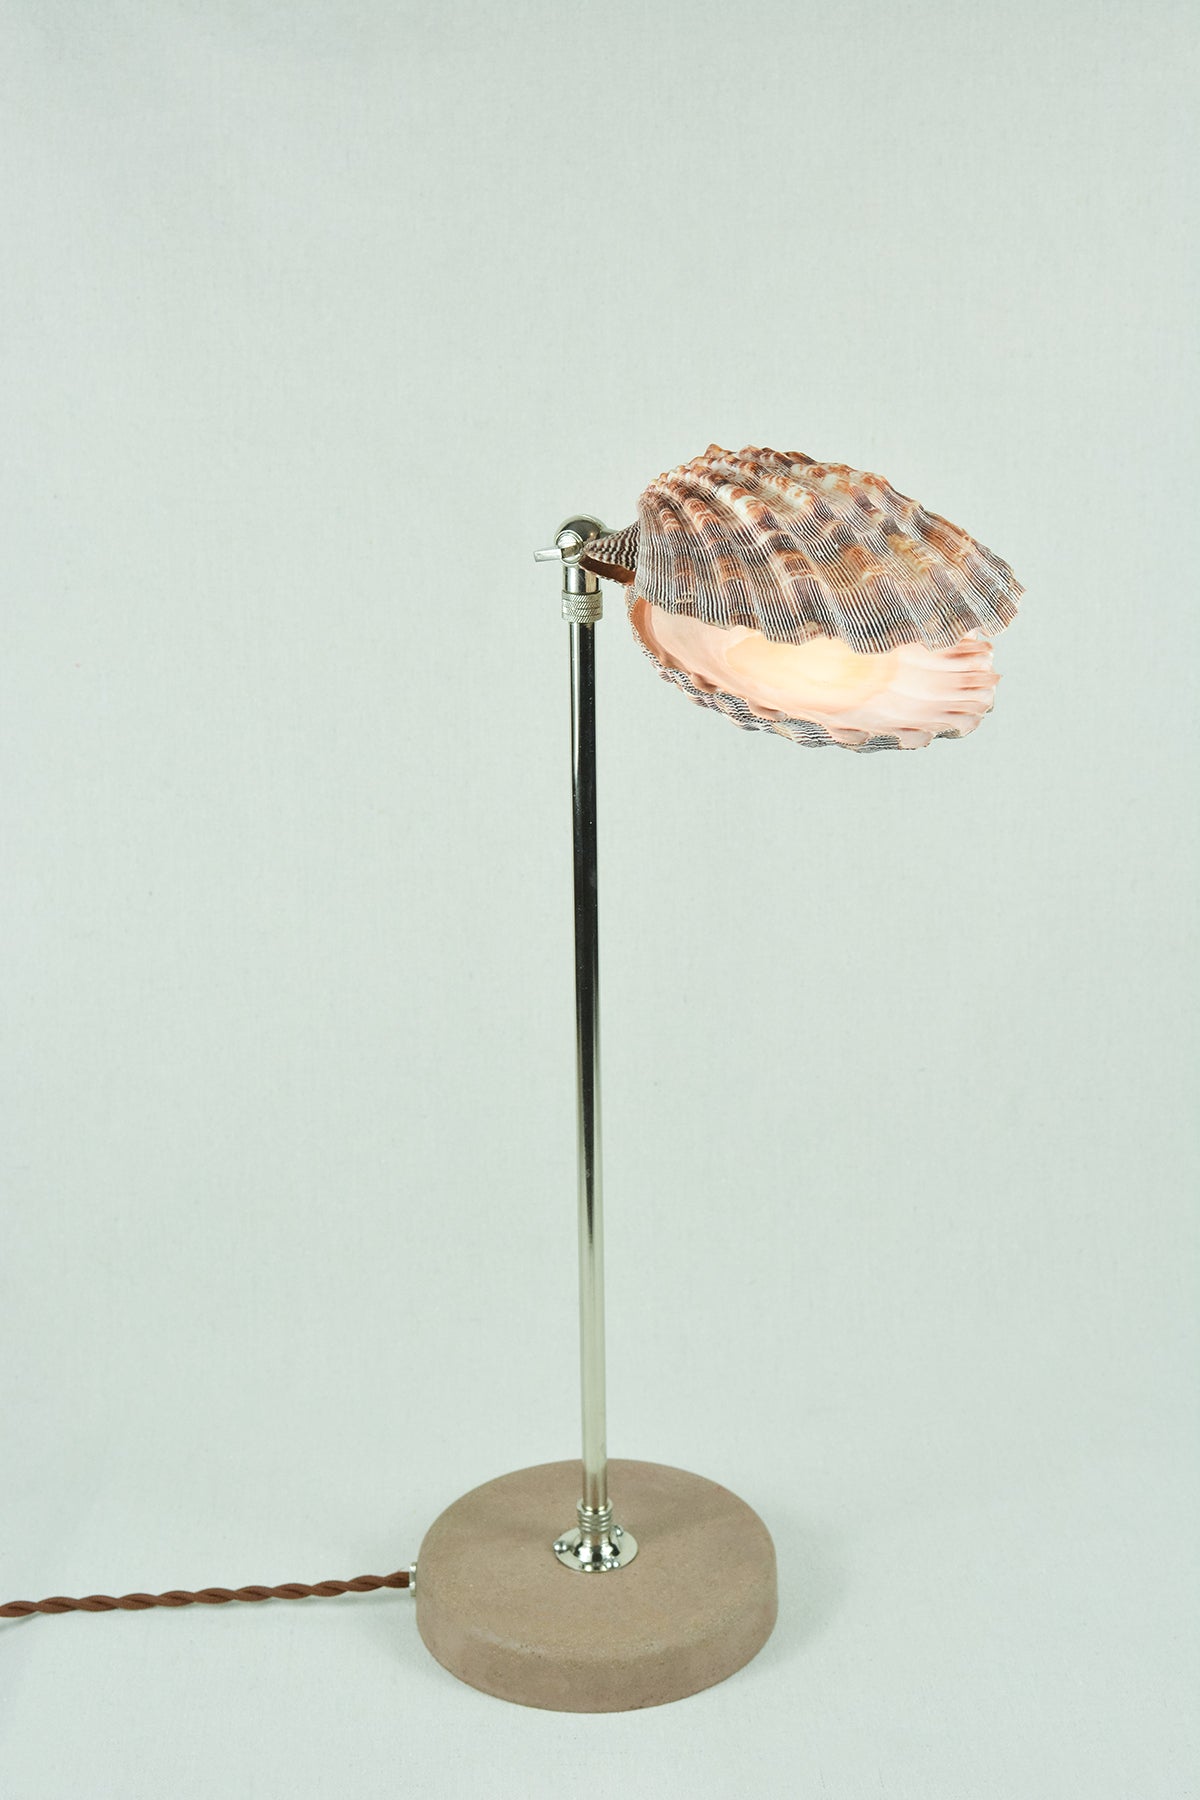 'Lavender Lion's Paw Lamp' with Natural Scallop Shell Shade — Model No. 019A - Tennant New York